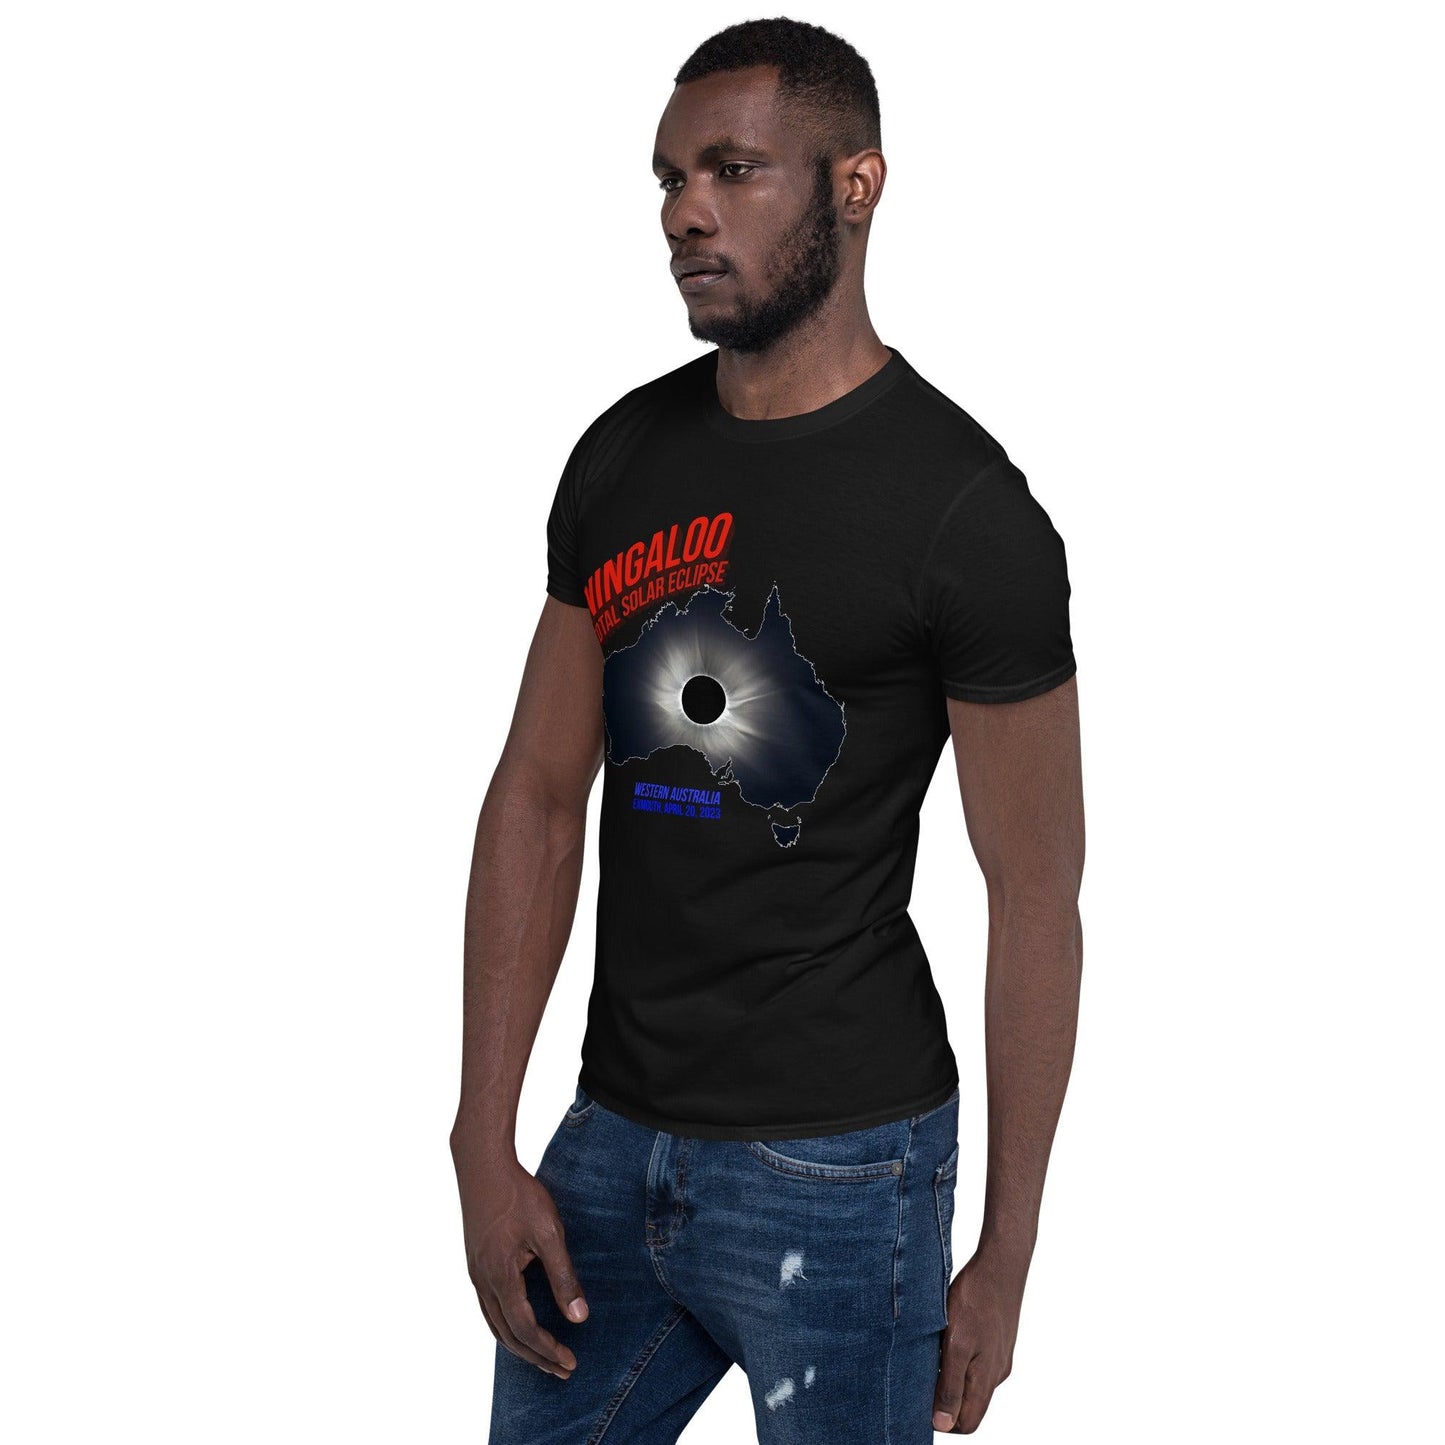 Ningaloo Eclipse by @SolarEclipseChasers - Astro TShirts